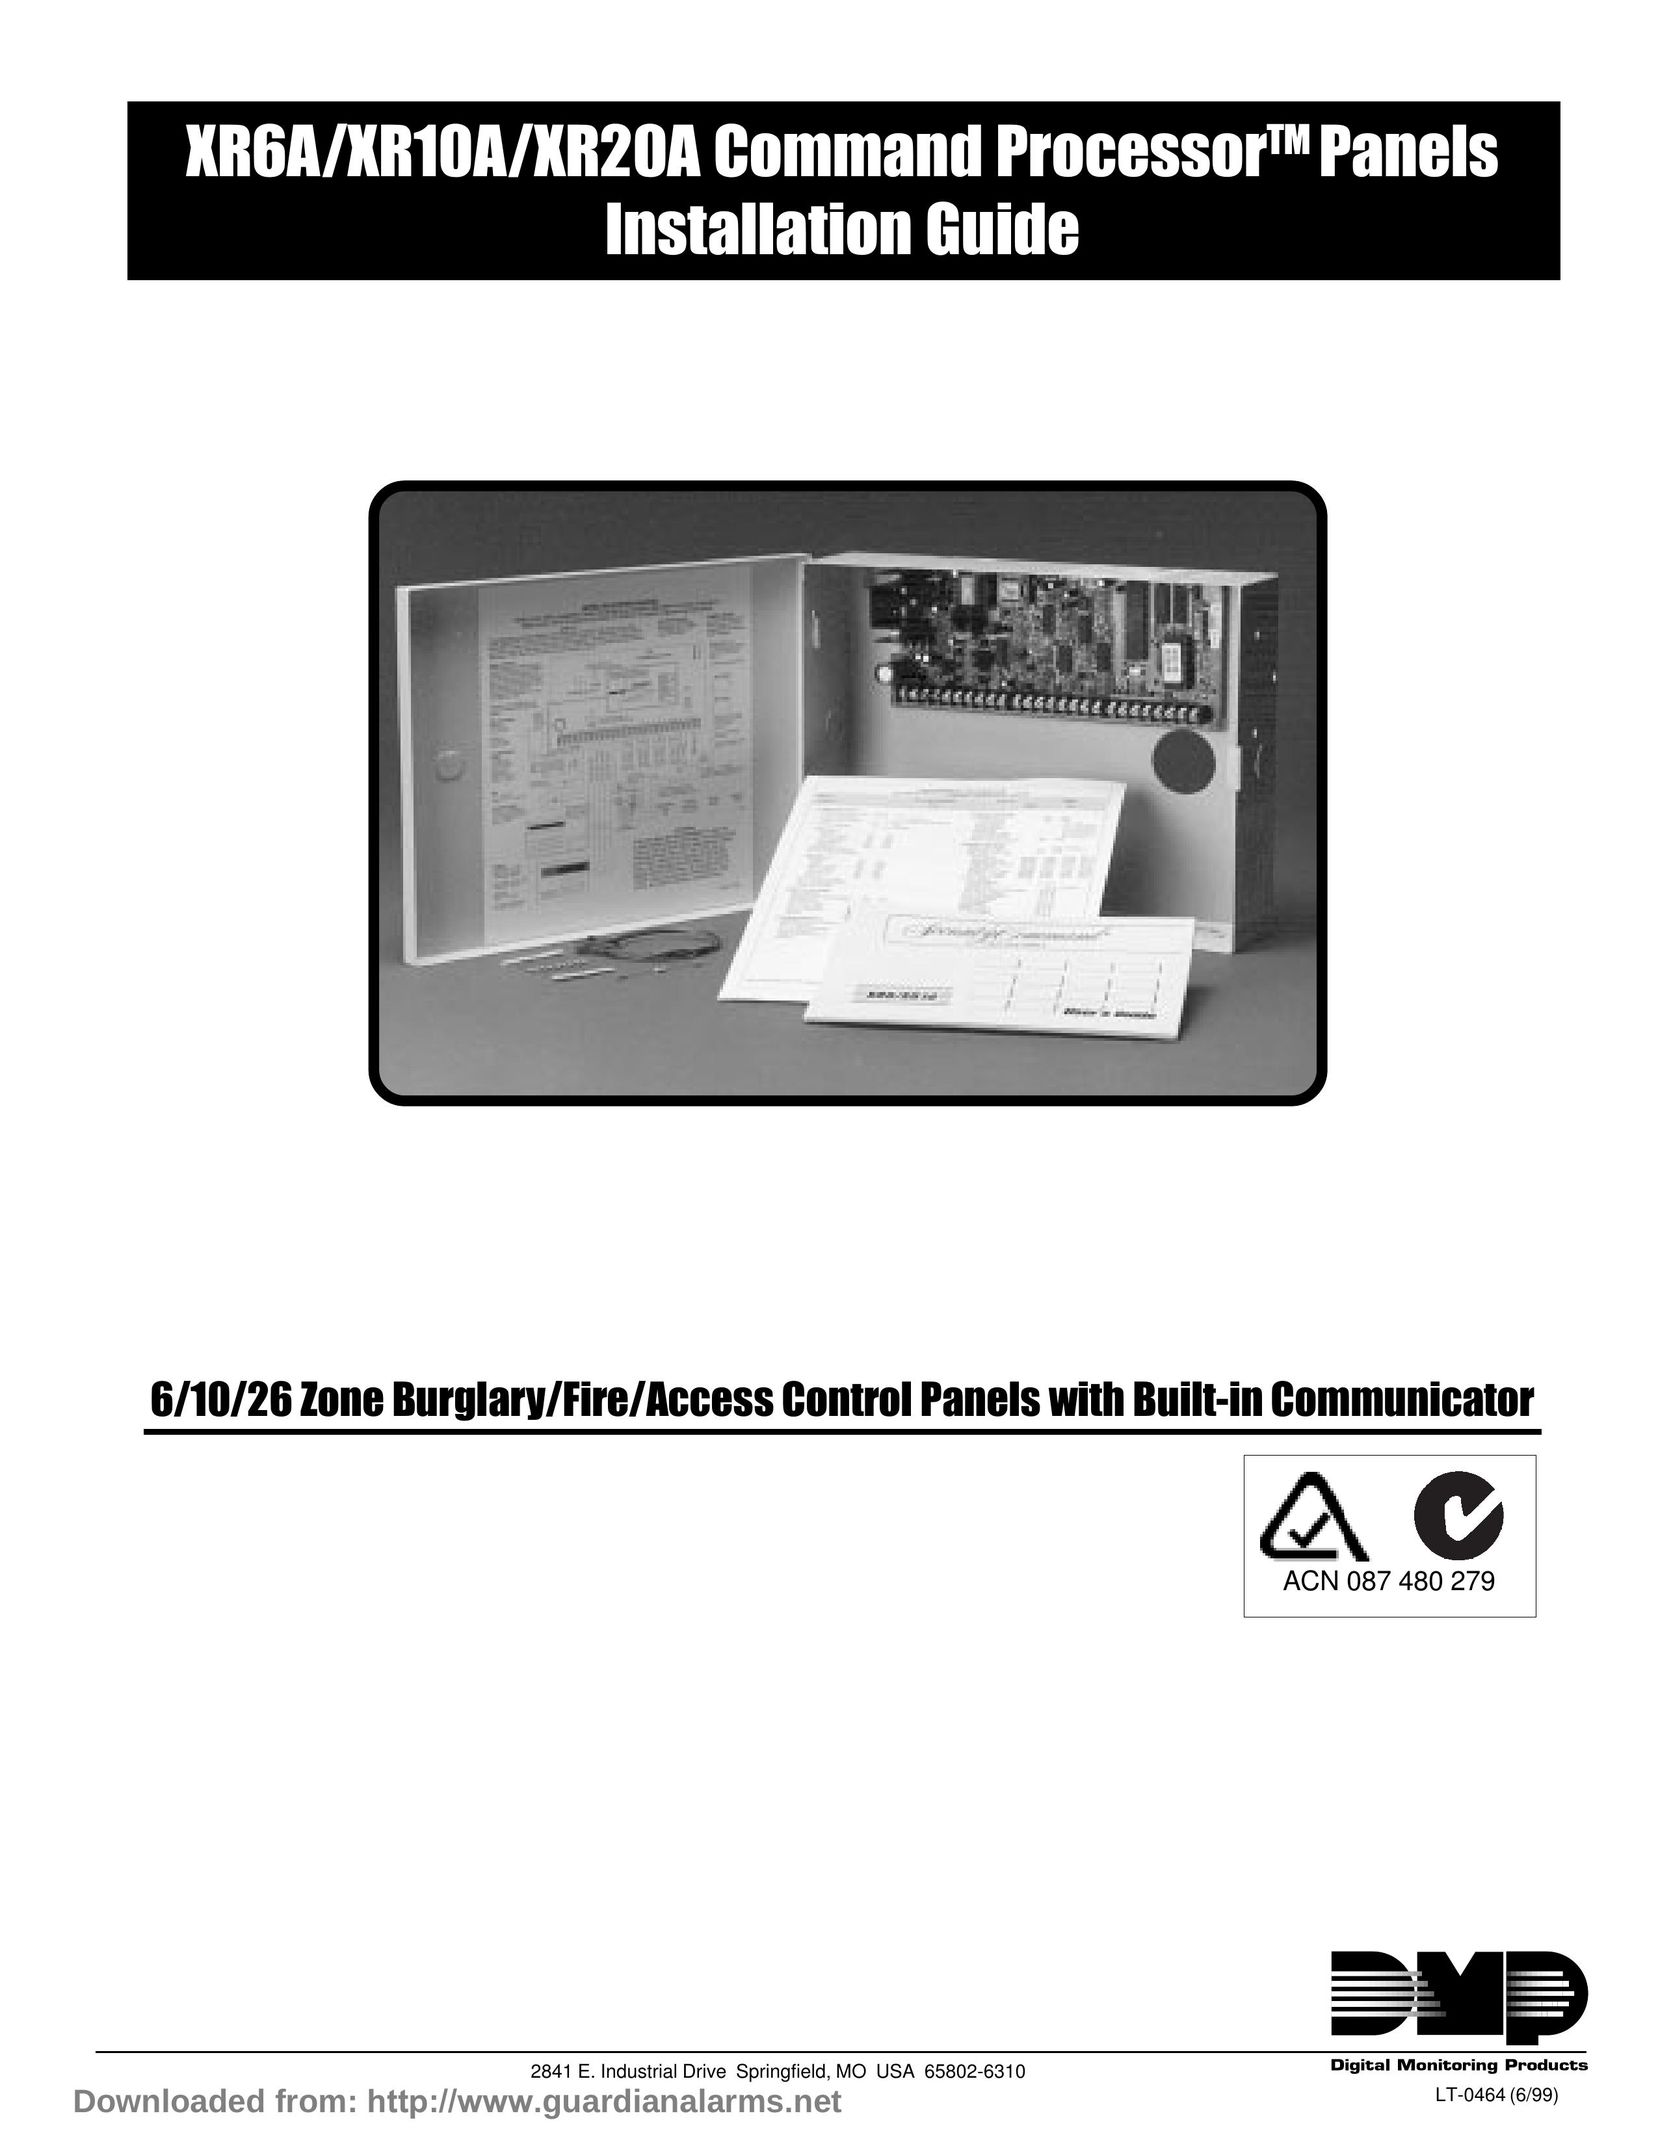 DMP Electronics XR10A Home Security System User Manual